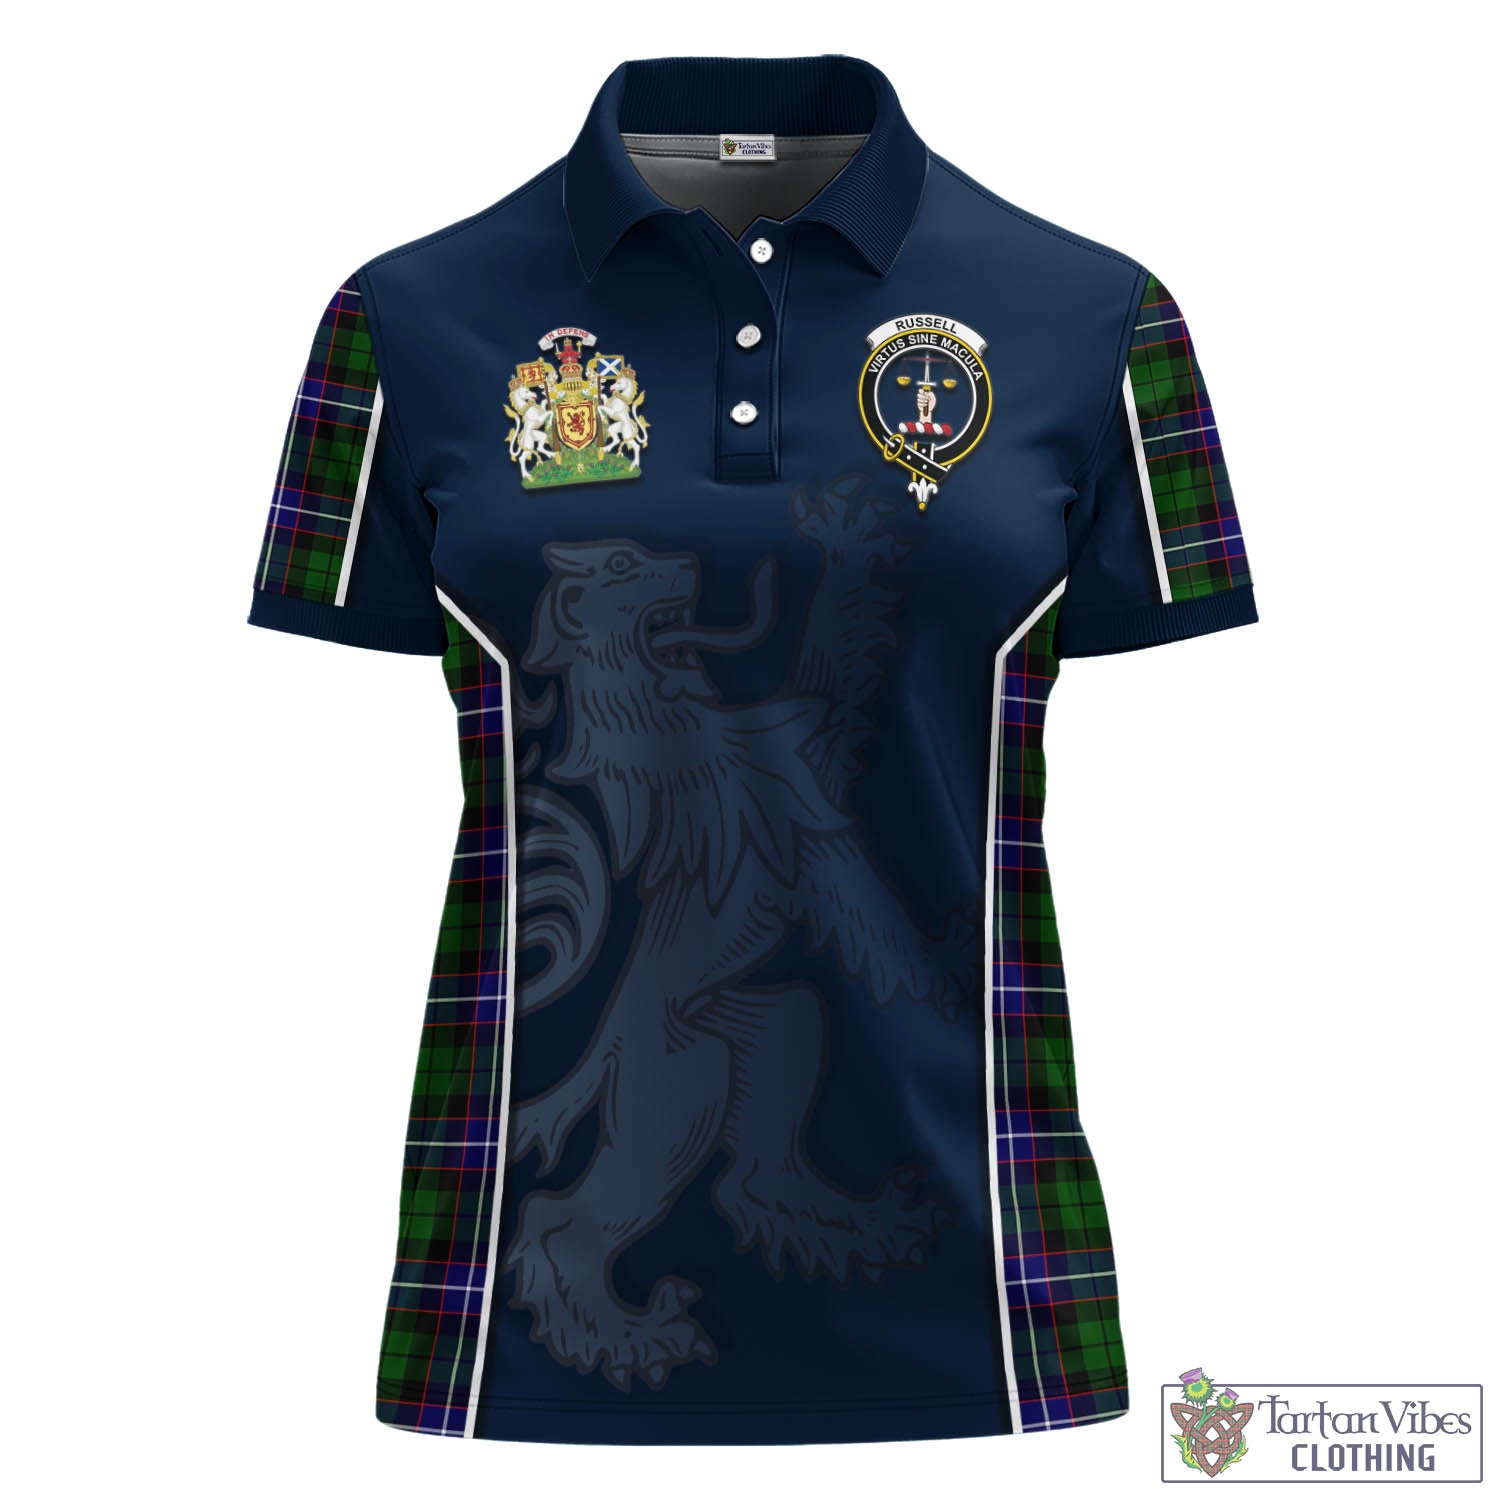 Tartan Vibes Clothing Russell Modern Tartan Women's Polo Shirt with Family Crest and Lion Rampant Vibes Sport Style